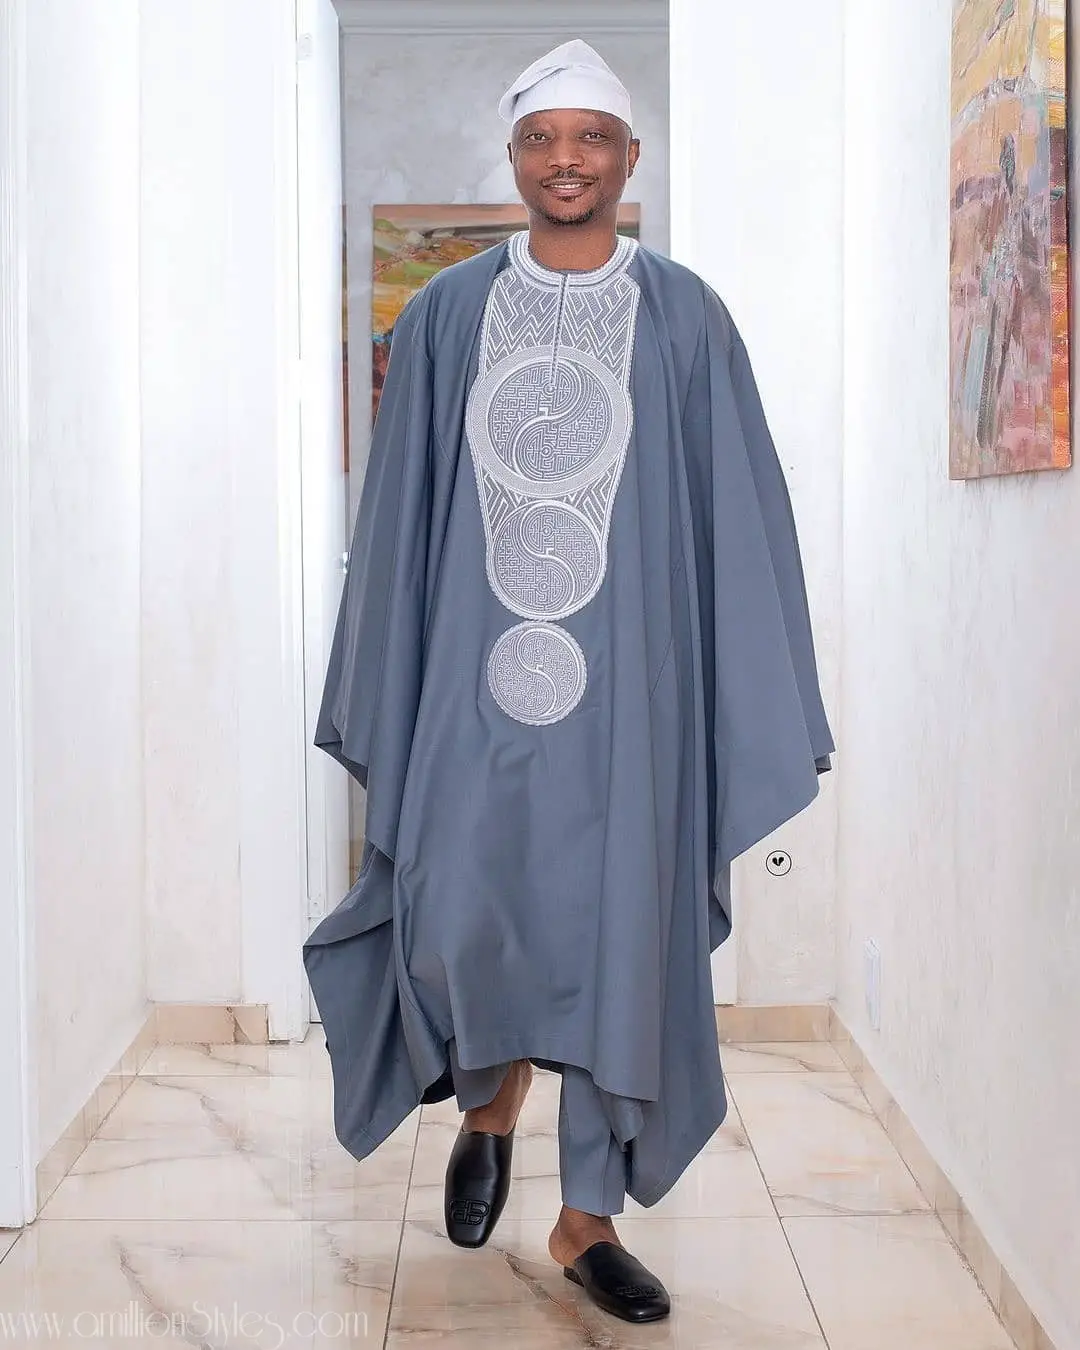 Latest Men Agbada Styles You Must SEE-Volume 1